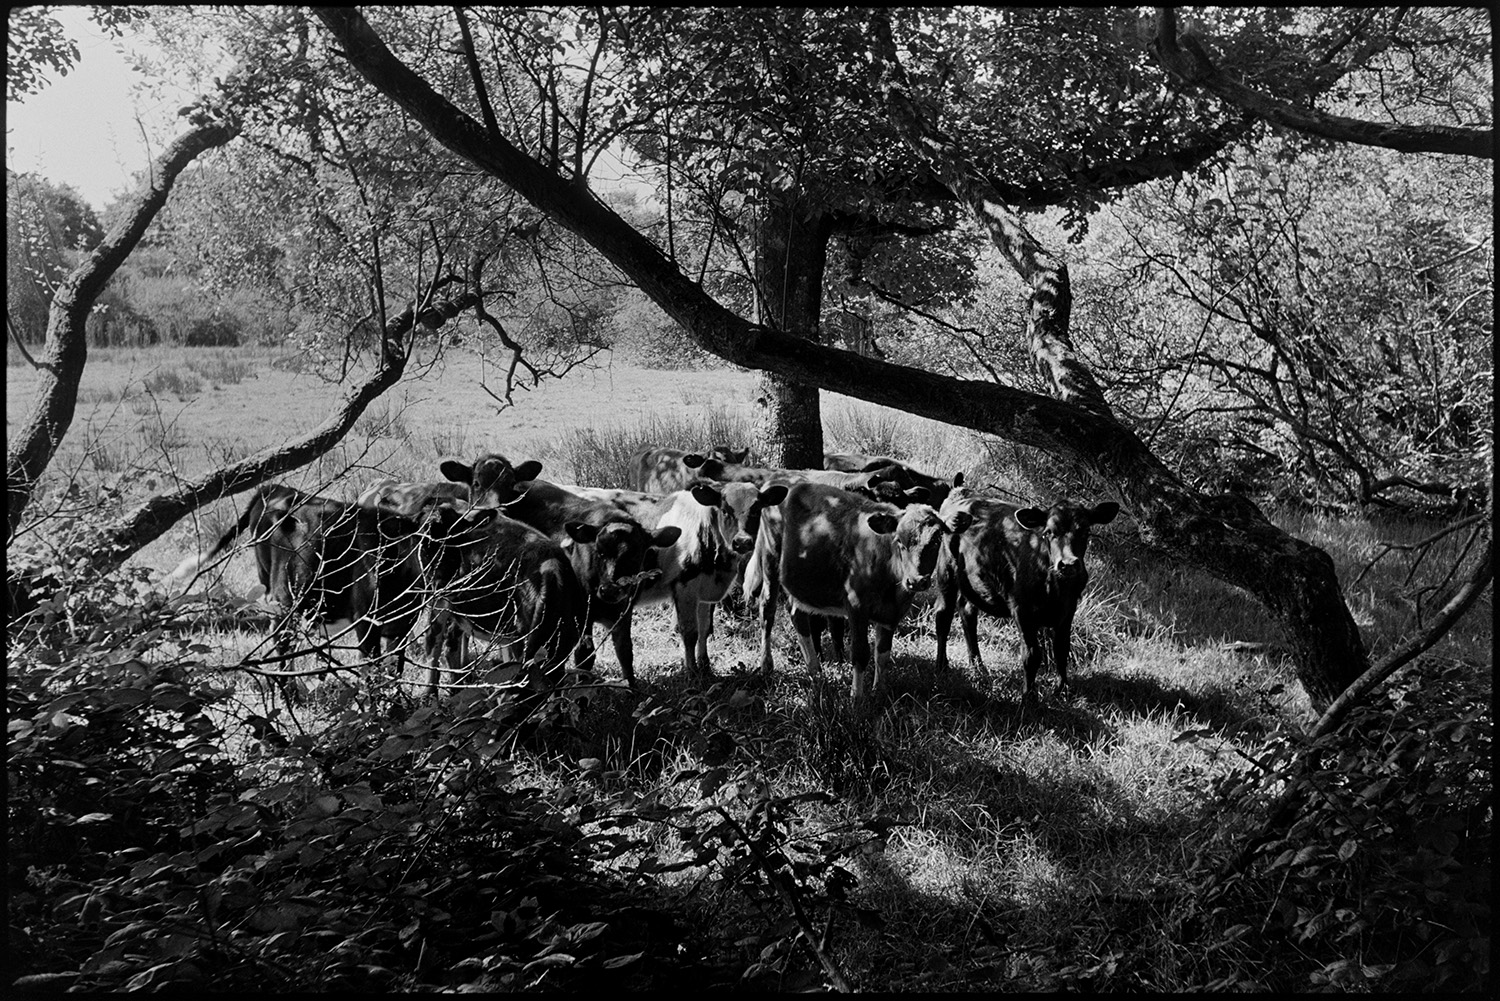 Cows in field and trees on hot day. 
[Cattle sheltering from the sun in the shade of trees, in a field at Stapleton, Langtree.]